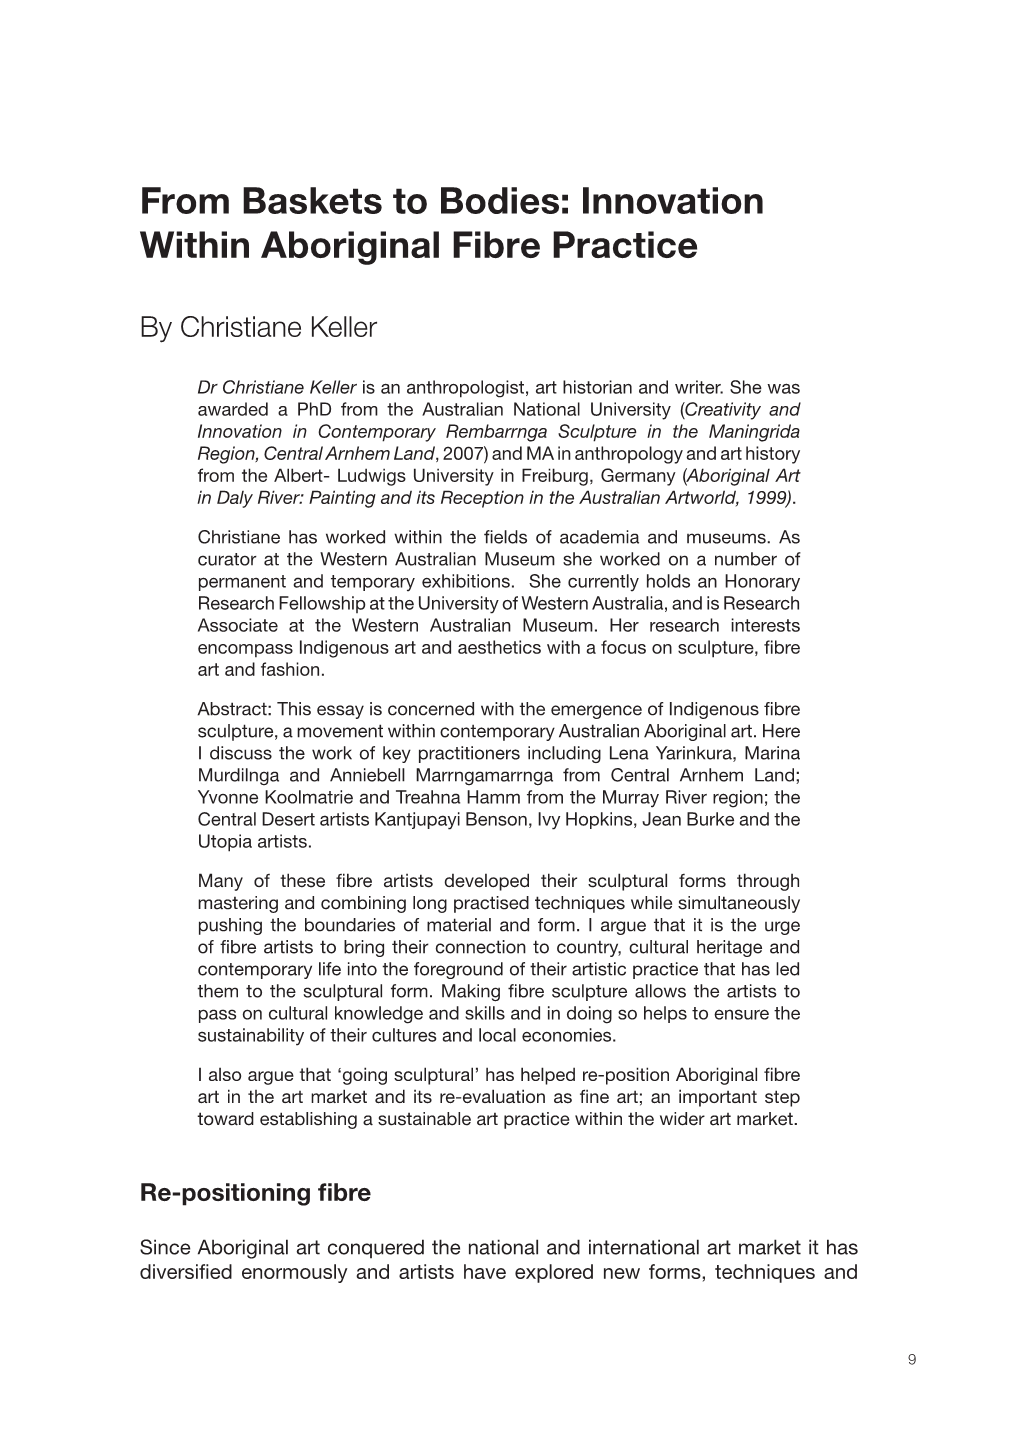 From Baskets to Bodies: Innovation Within Aboriginal Fibre Practice